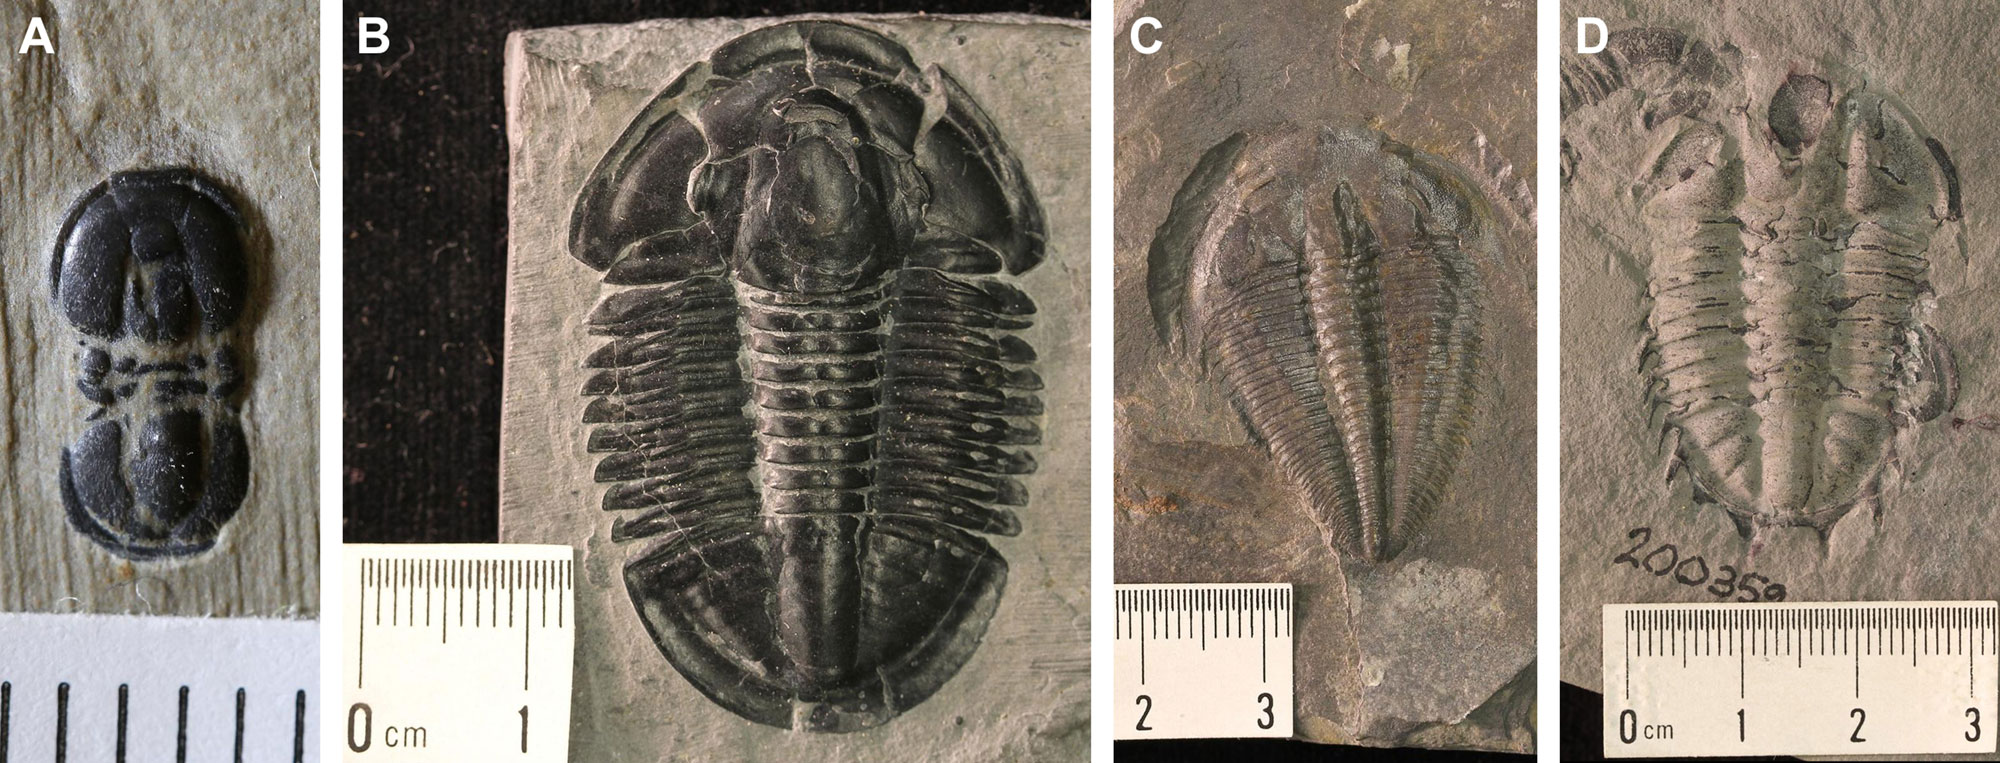 4-Panel image of trilobites from the Cambrian of Utah. Panel 1: A short, oval-shaped trilobite with rounded front and back and few segments. Panel 2: A trilobite that is several centimeters long with a short, broad head and pygidium. Between, there are about 10 segments. Panel 3: A trilobite with a short, broad head and a body that tapers toward the pygidium (back end). Panel 4: A poorly preserved trilobite that is roughly oval in shape with distinct short spines projecting from the sides and back of the body. All the trilobites are small (less than 1 centimeter to several centimeters long.)